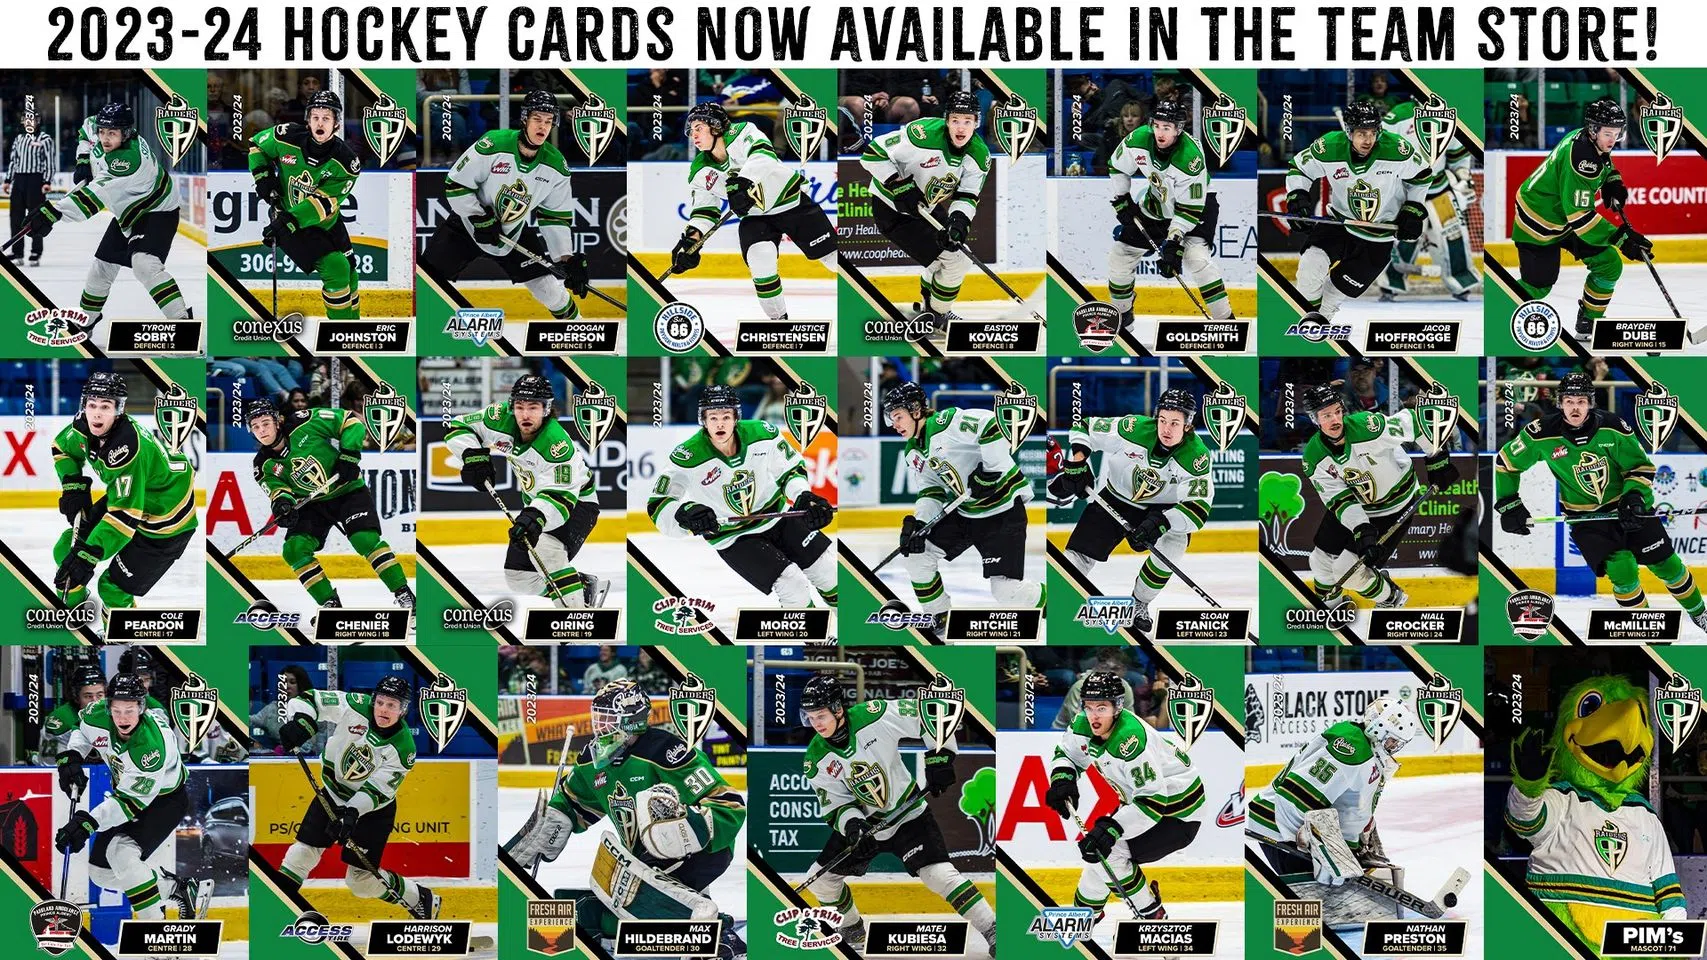 Score Big with the Prince Albert Raiders 2023-24 Hockey Card Collection